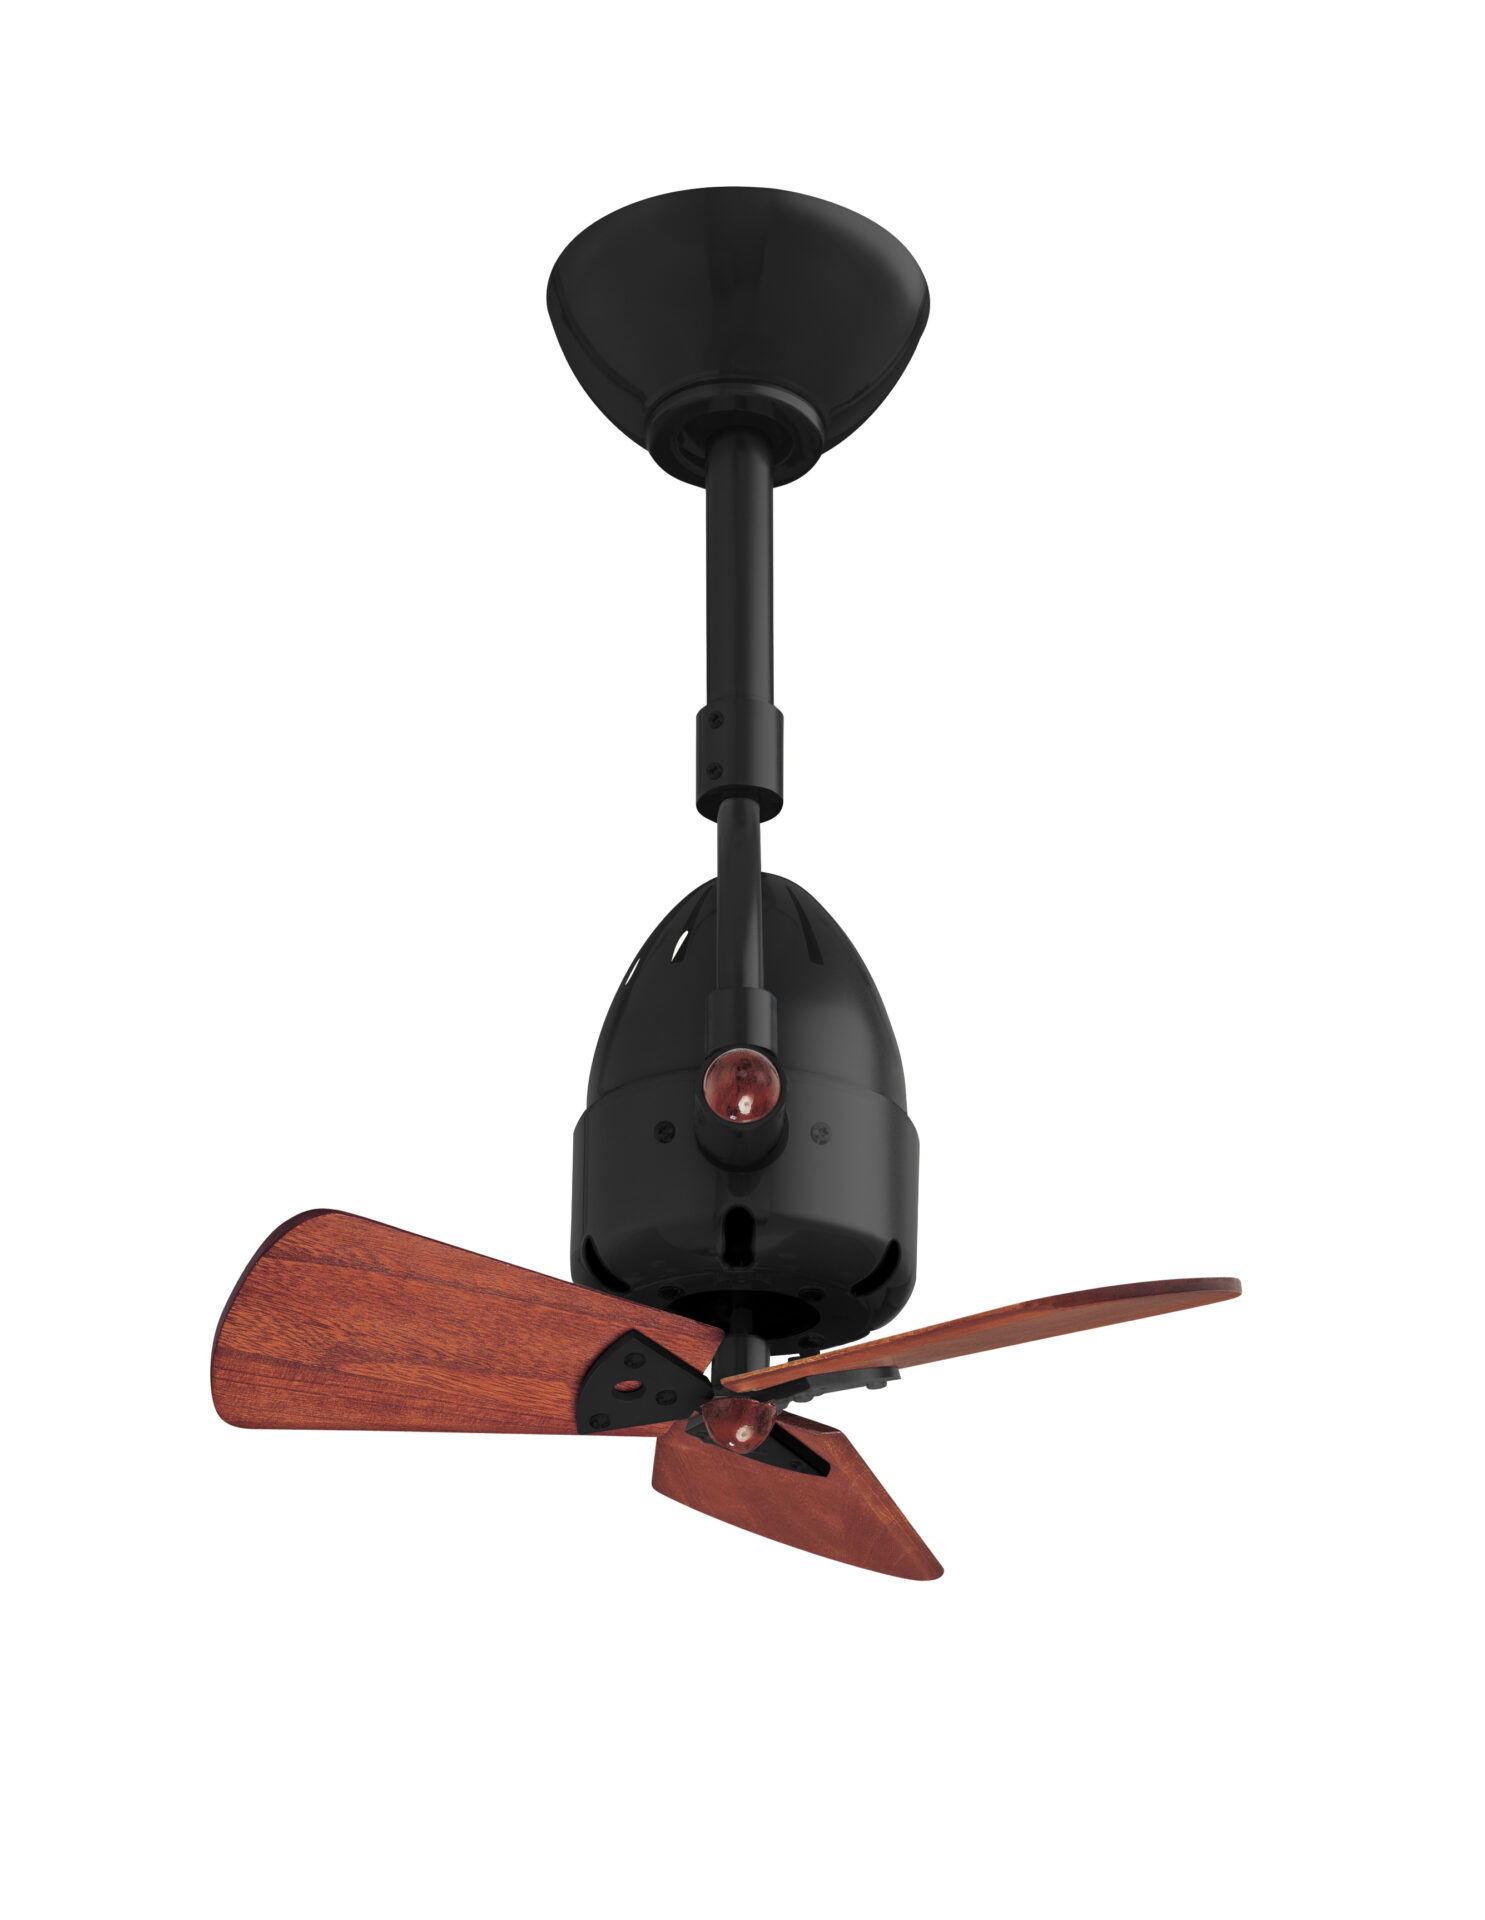 Diane ceiling fan in Matte Black with Mahogany wood blades manufactured by Matthews Fan Company.